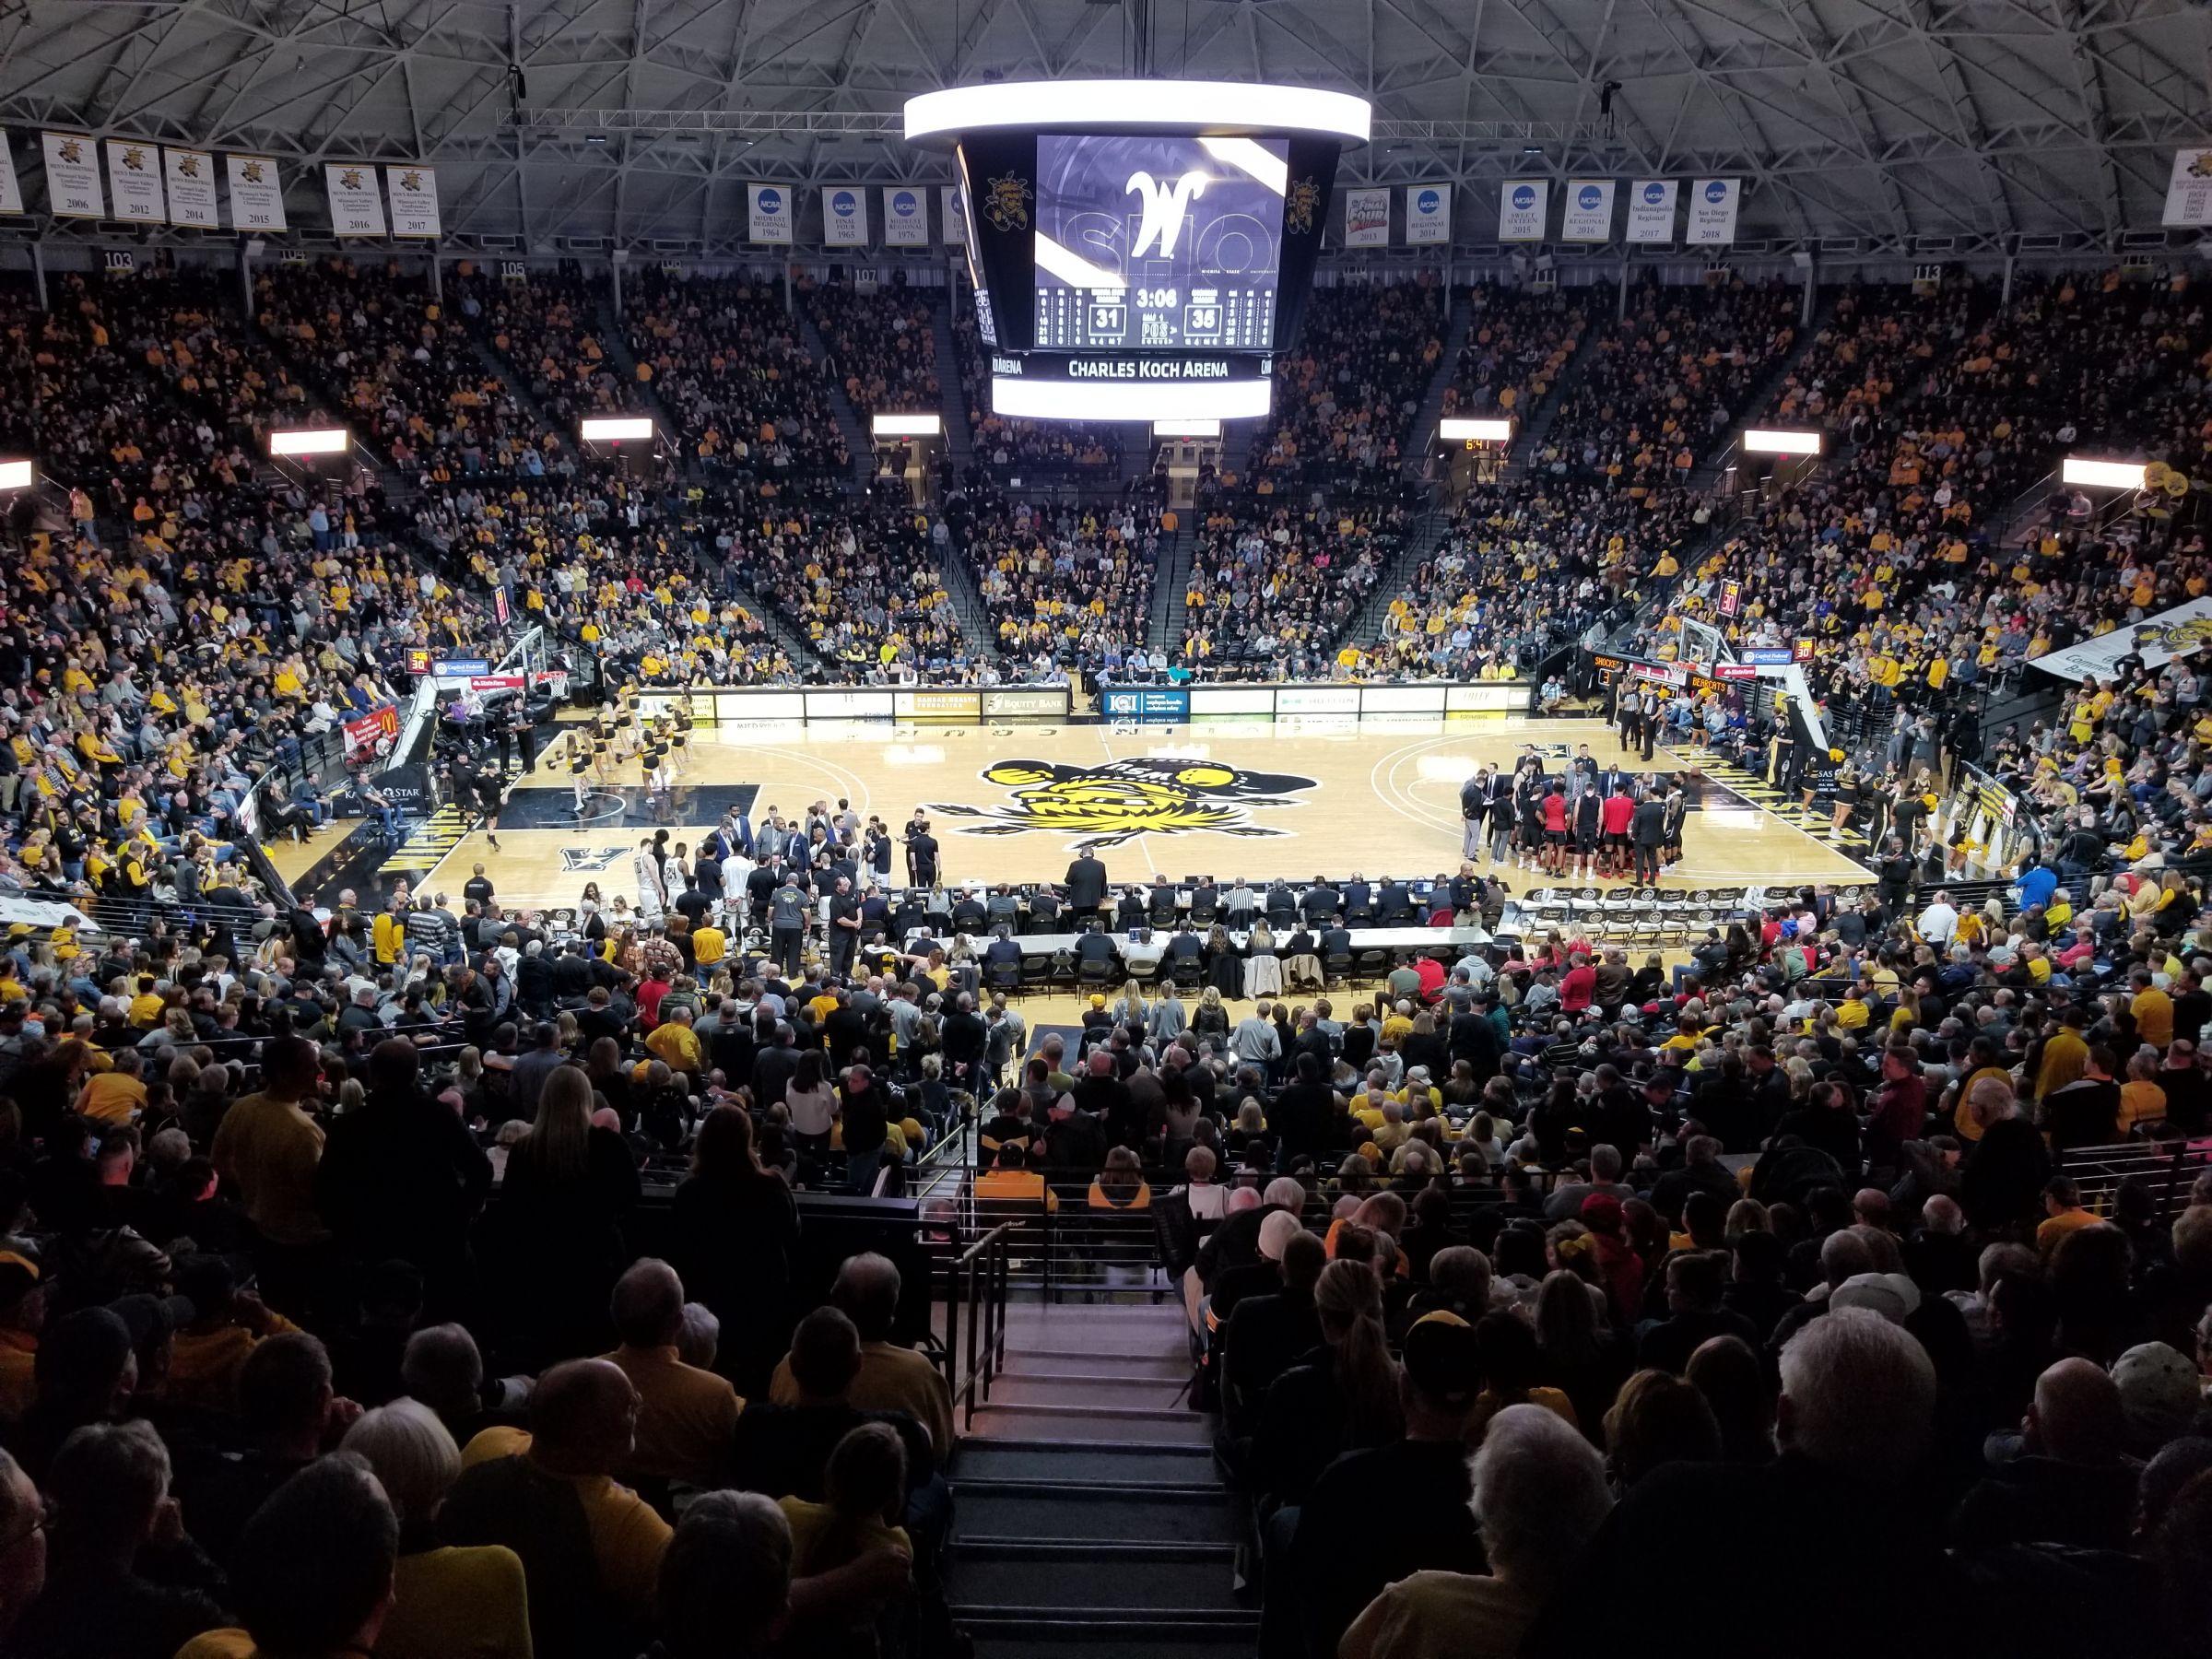 section 121, row 29 seat view  - charles koch arena